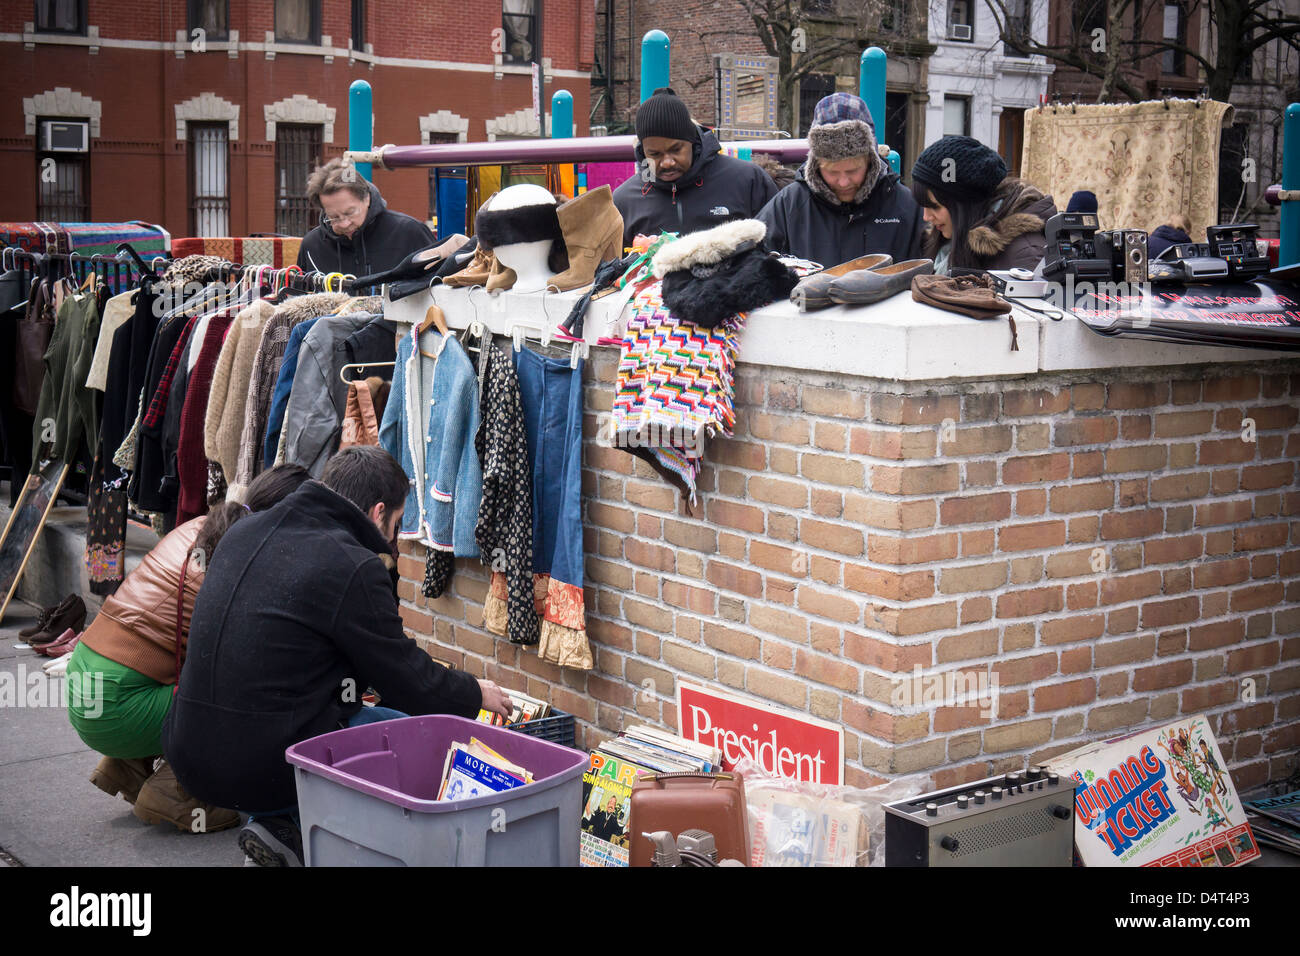 Shoppers search for bargains at a flea market in the Park Slope neighborhood of Brooklyn in New York Stock Photo